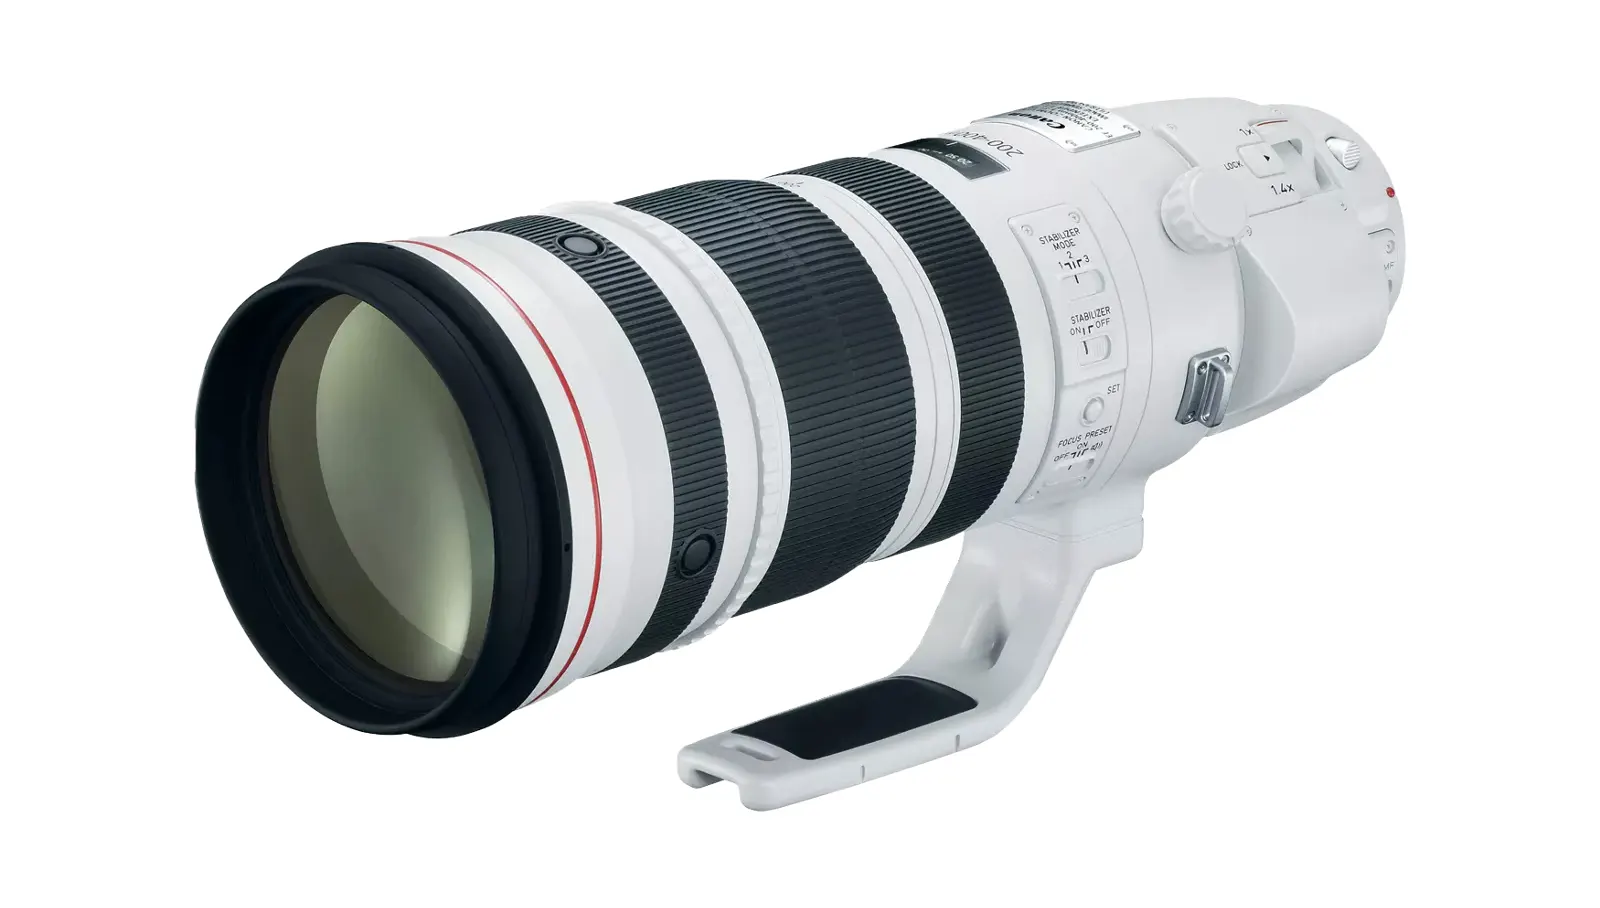 Canon EF 200-400mm f/4L IS USM telephoto lens